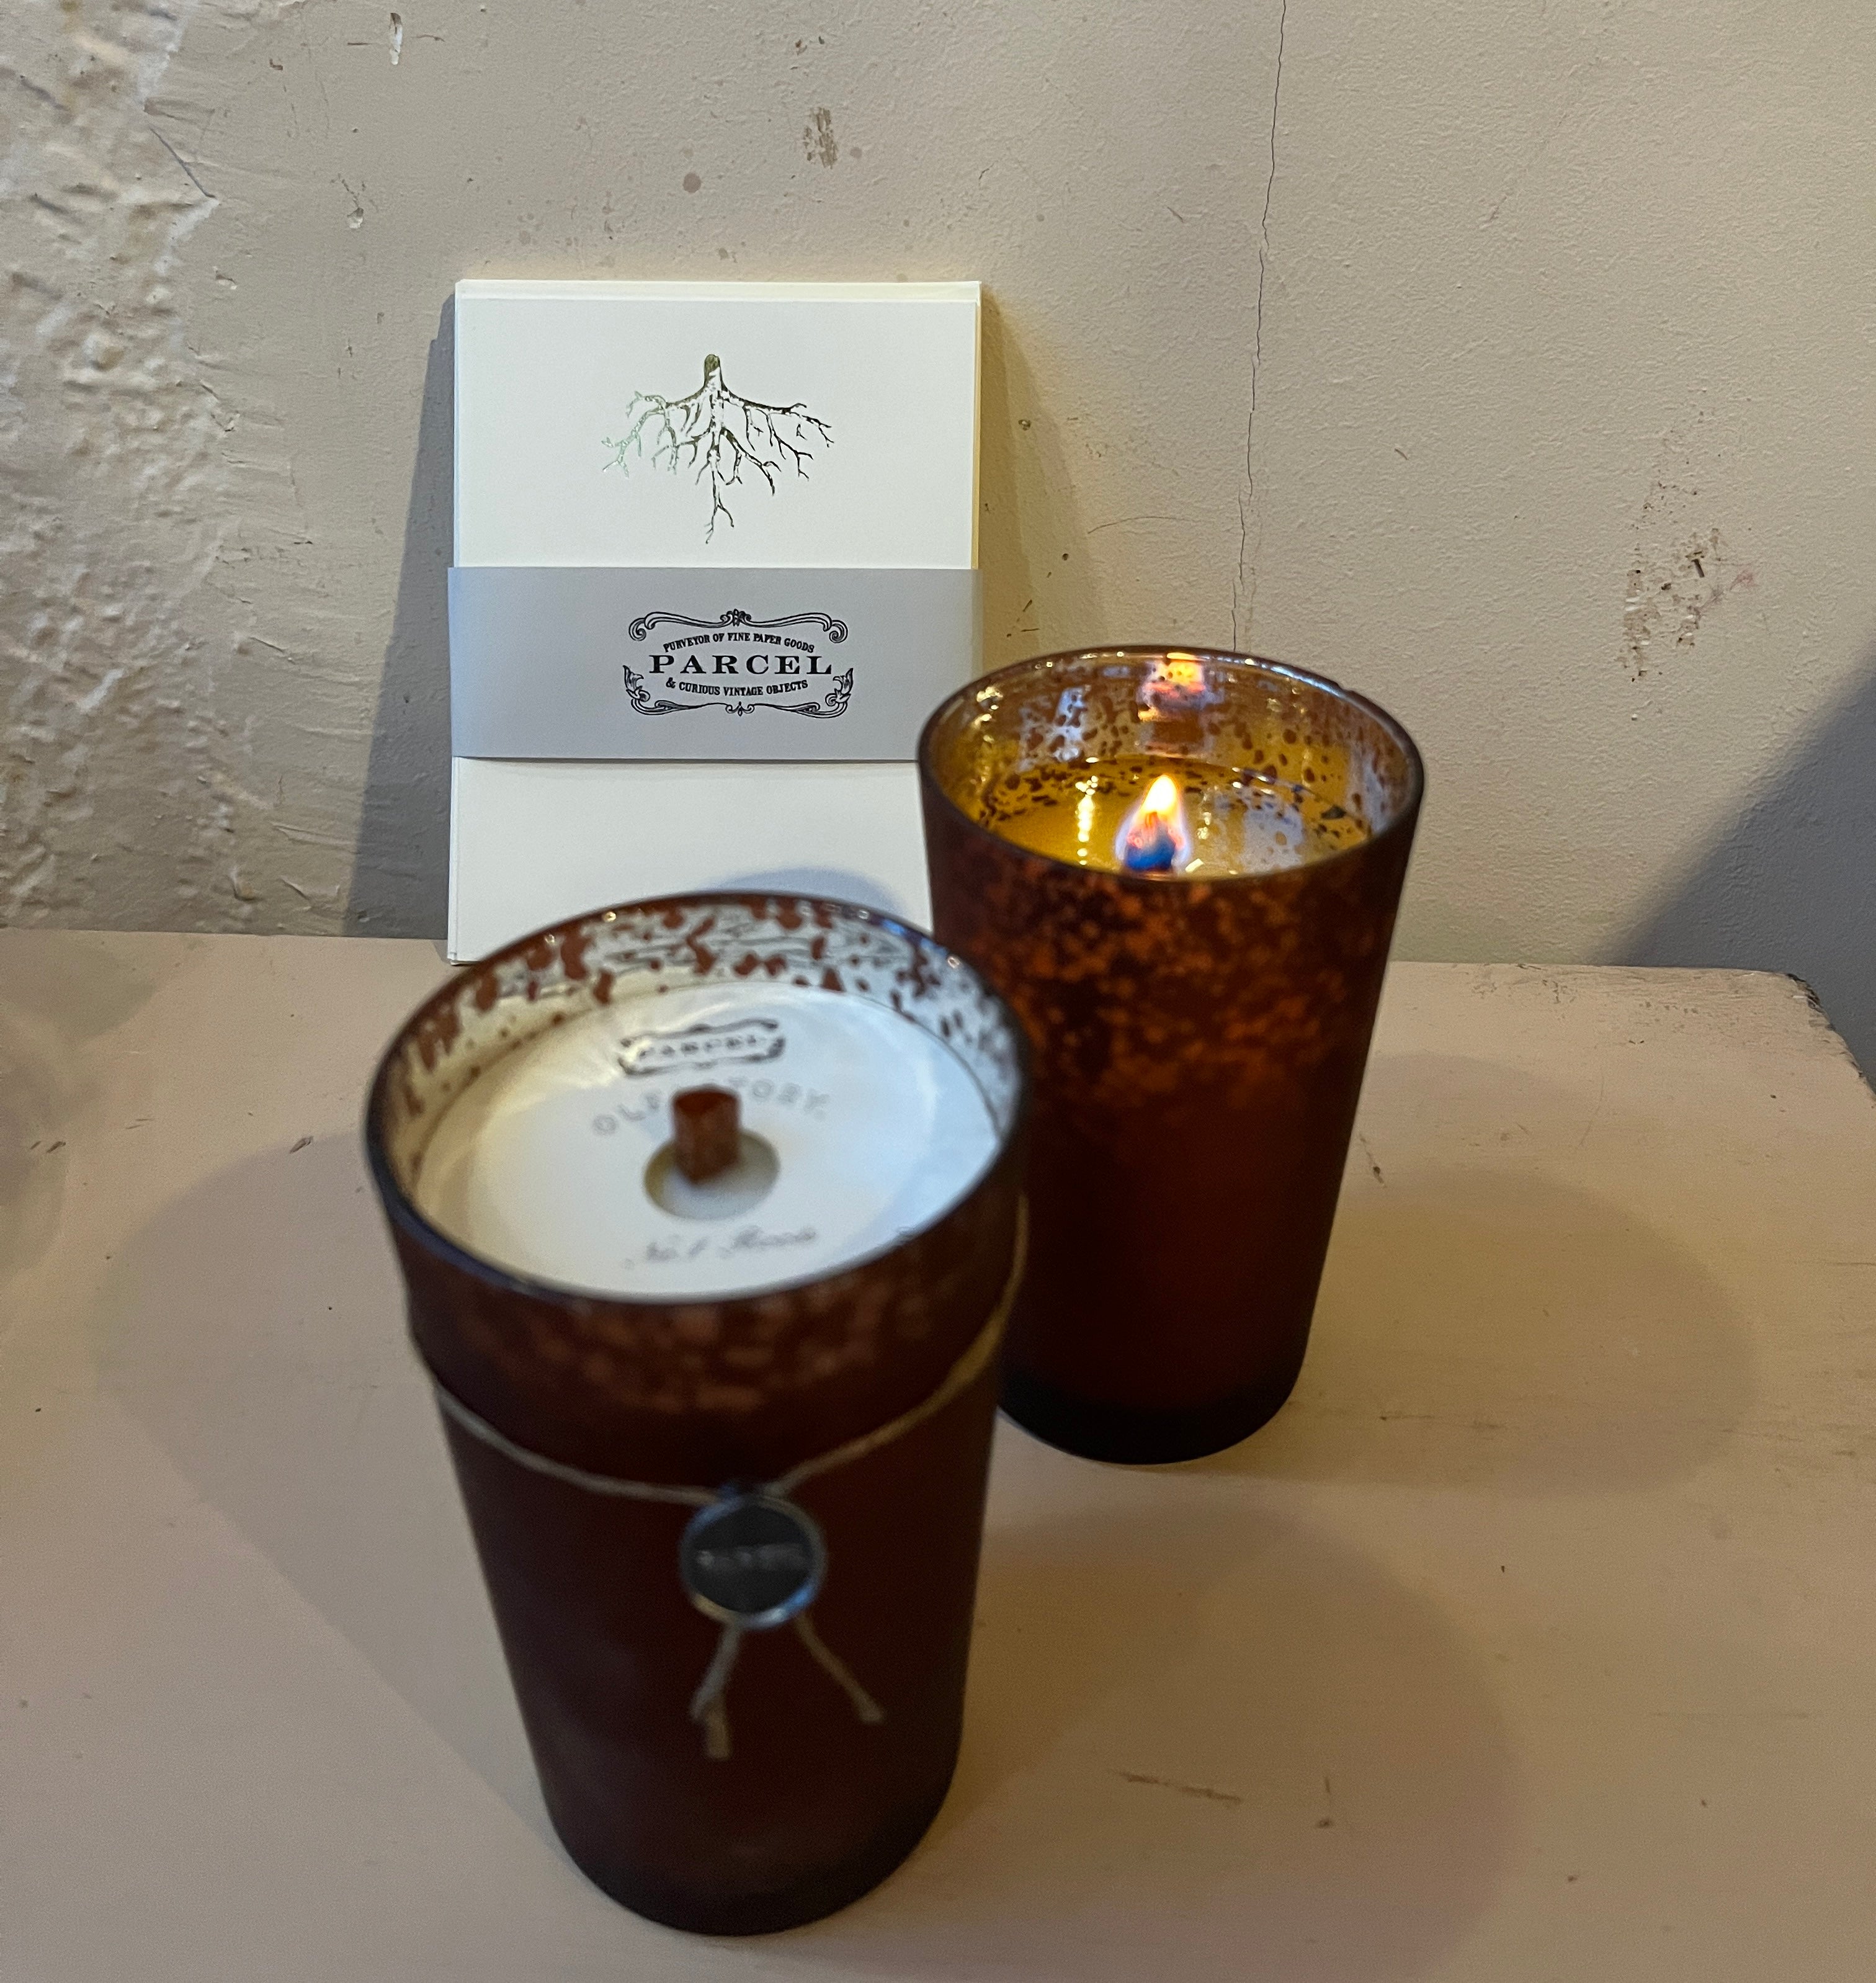 No. 1: Roots Parcel Olfactory Scented Candle